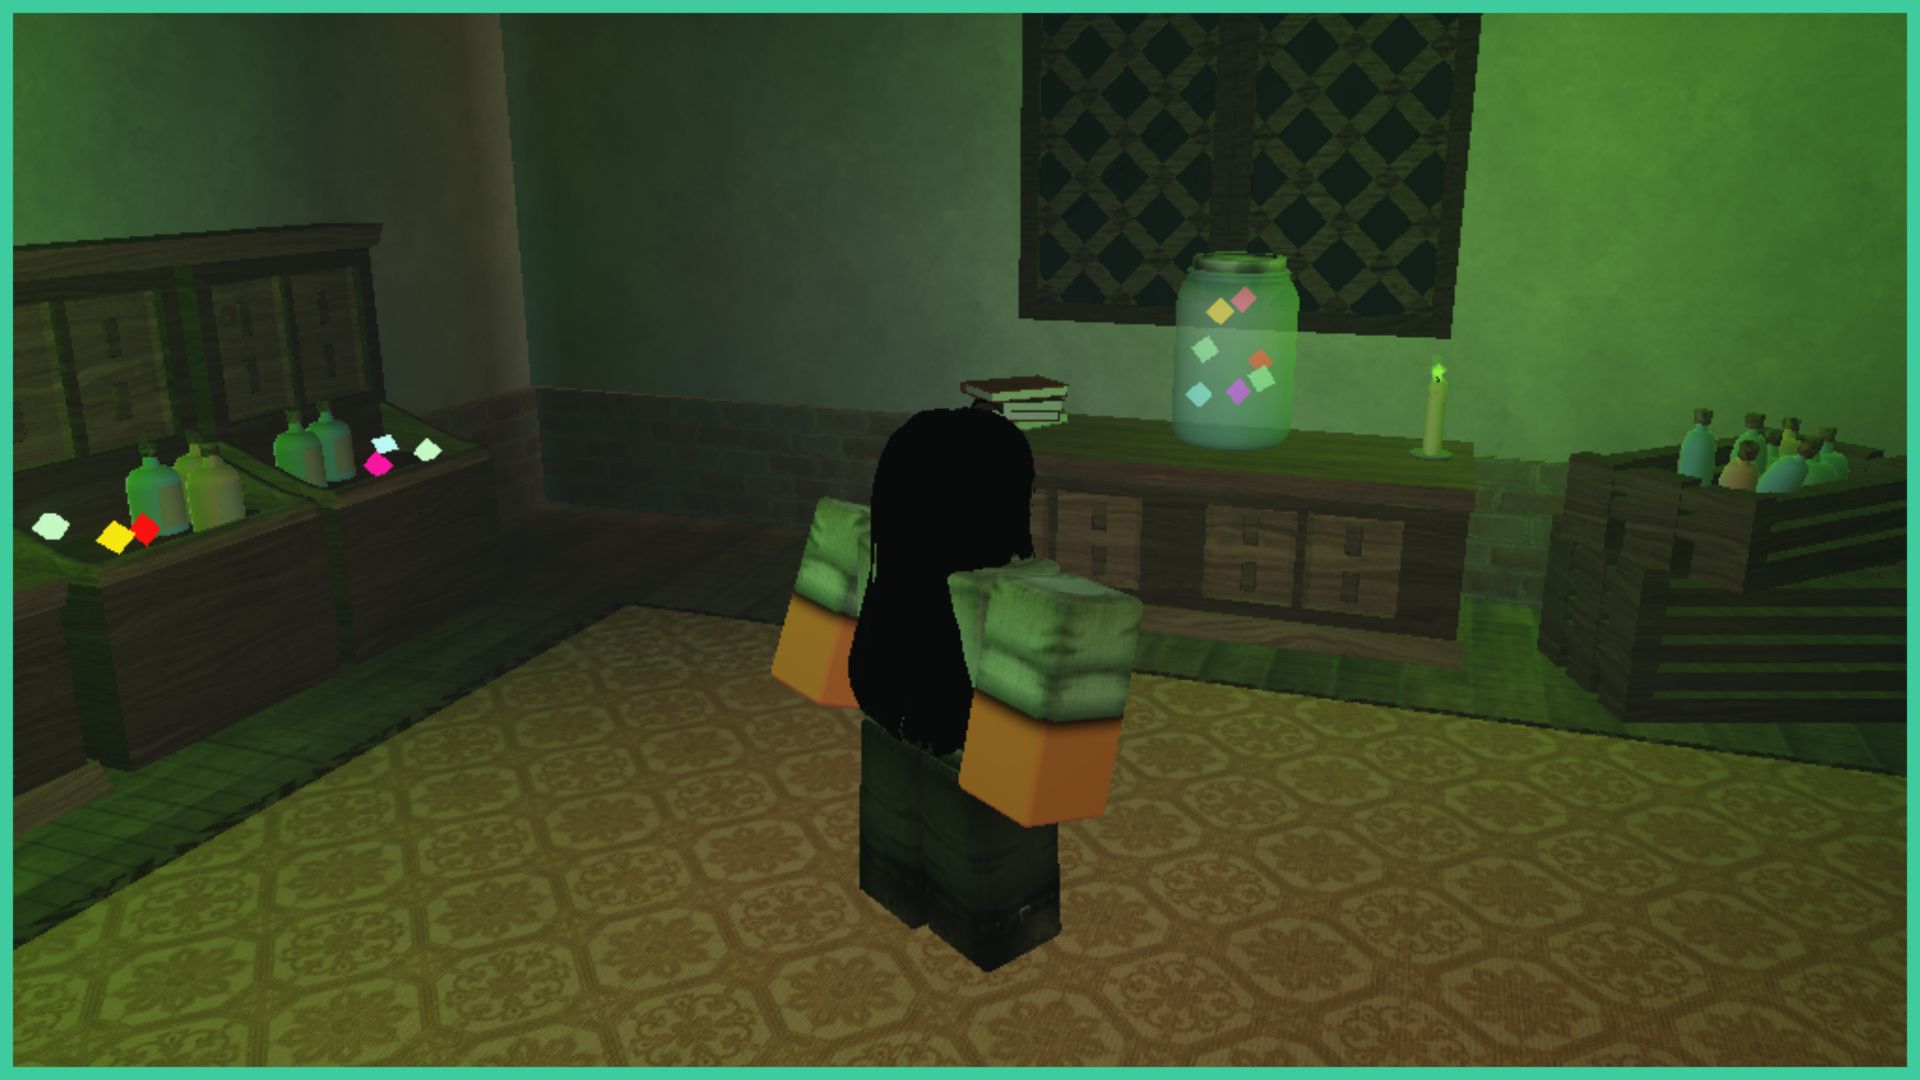 feature image for our arcane lineage cursed enchant guide, the image features a screenshot of a roblox play standing by a wooden counter with a jar full of gems inside next to a lit candle and a small pile of books, there are boxes of small bottles on either side of the room as well as more gems in some wooden crates